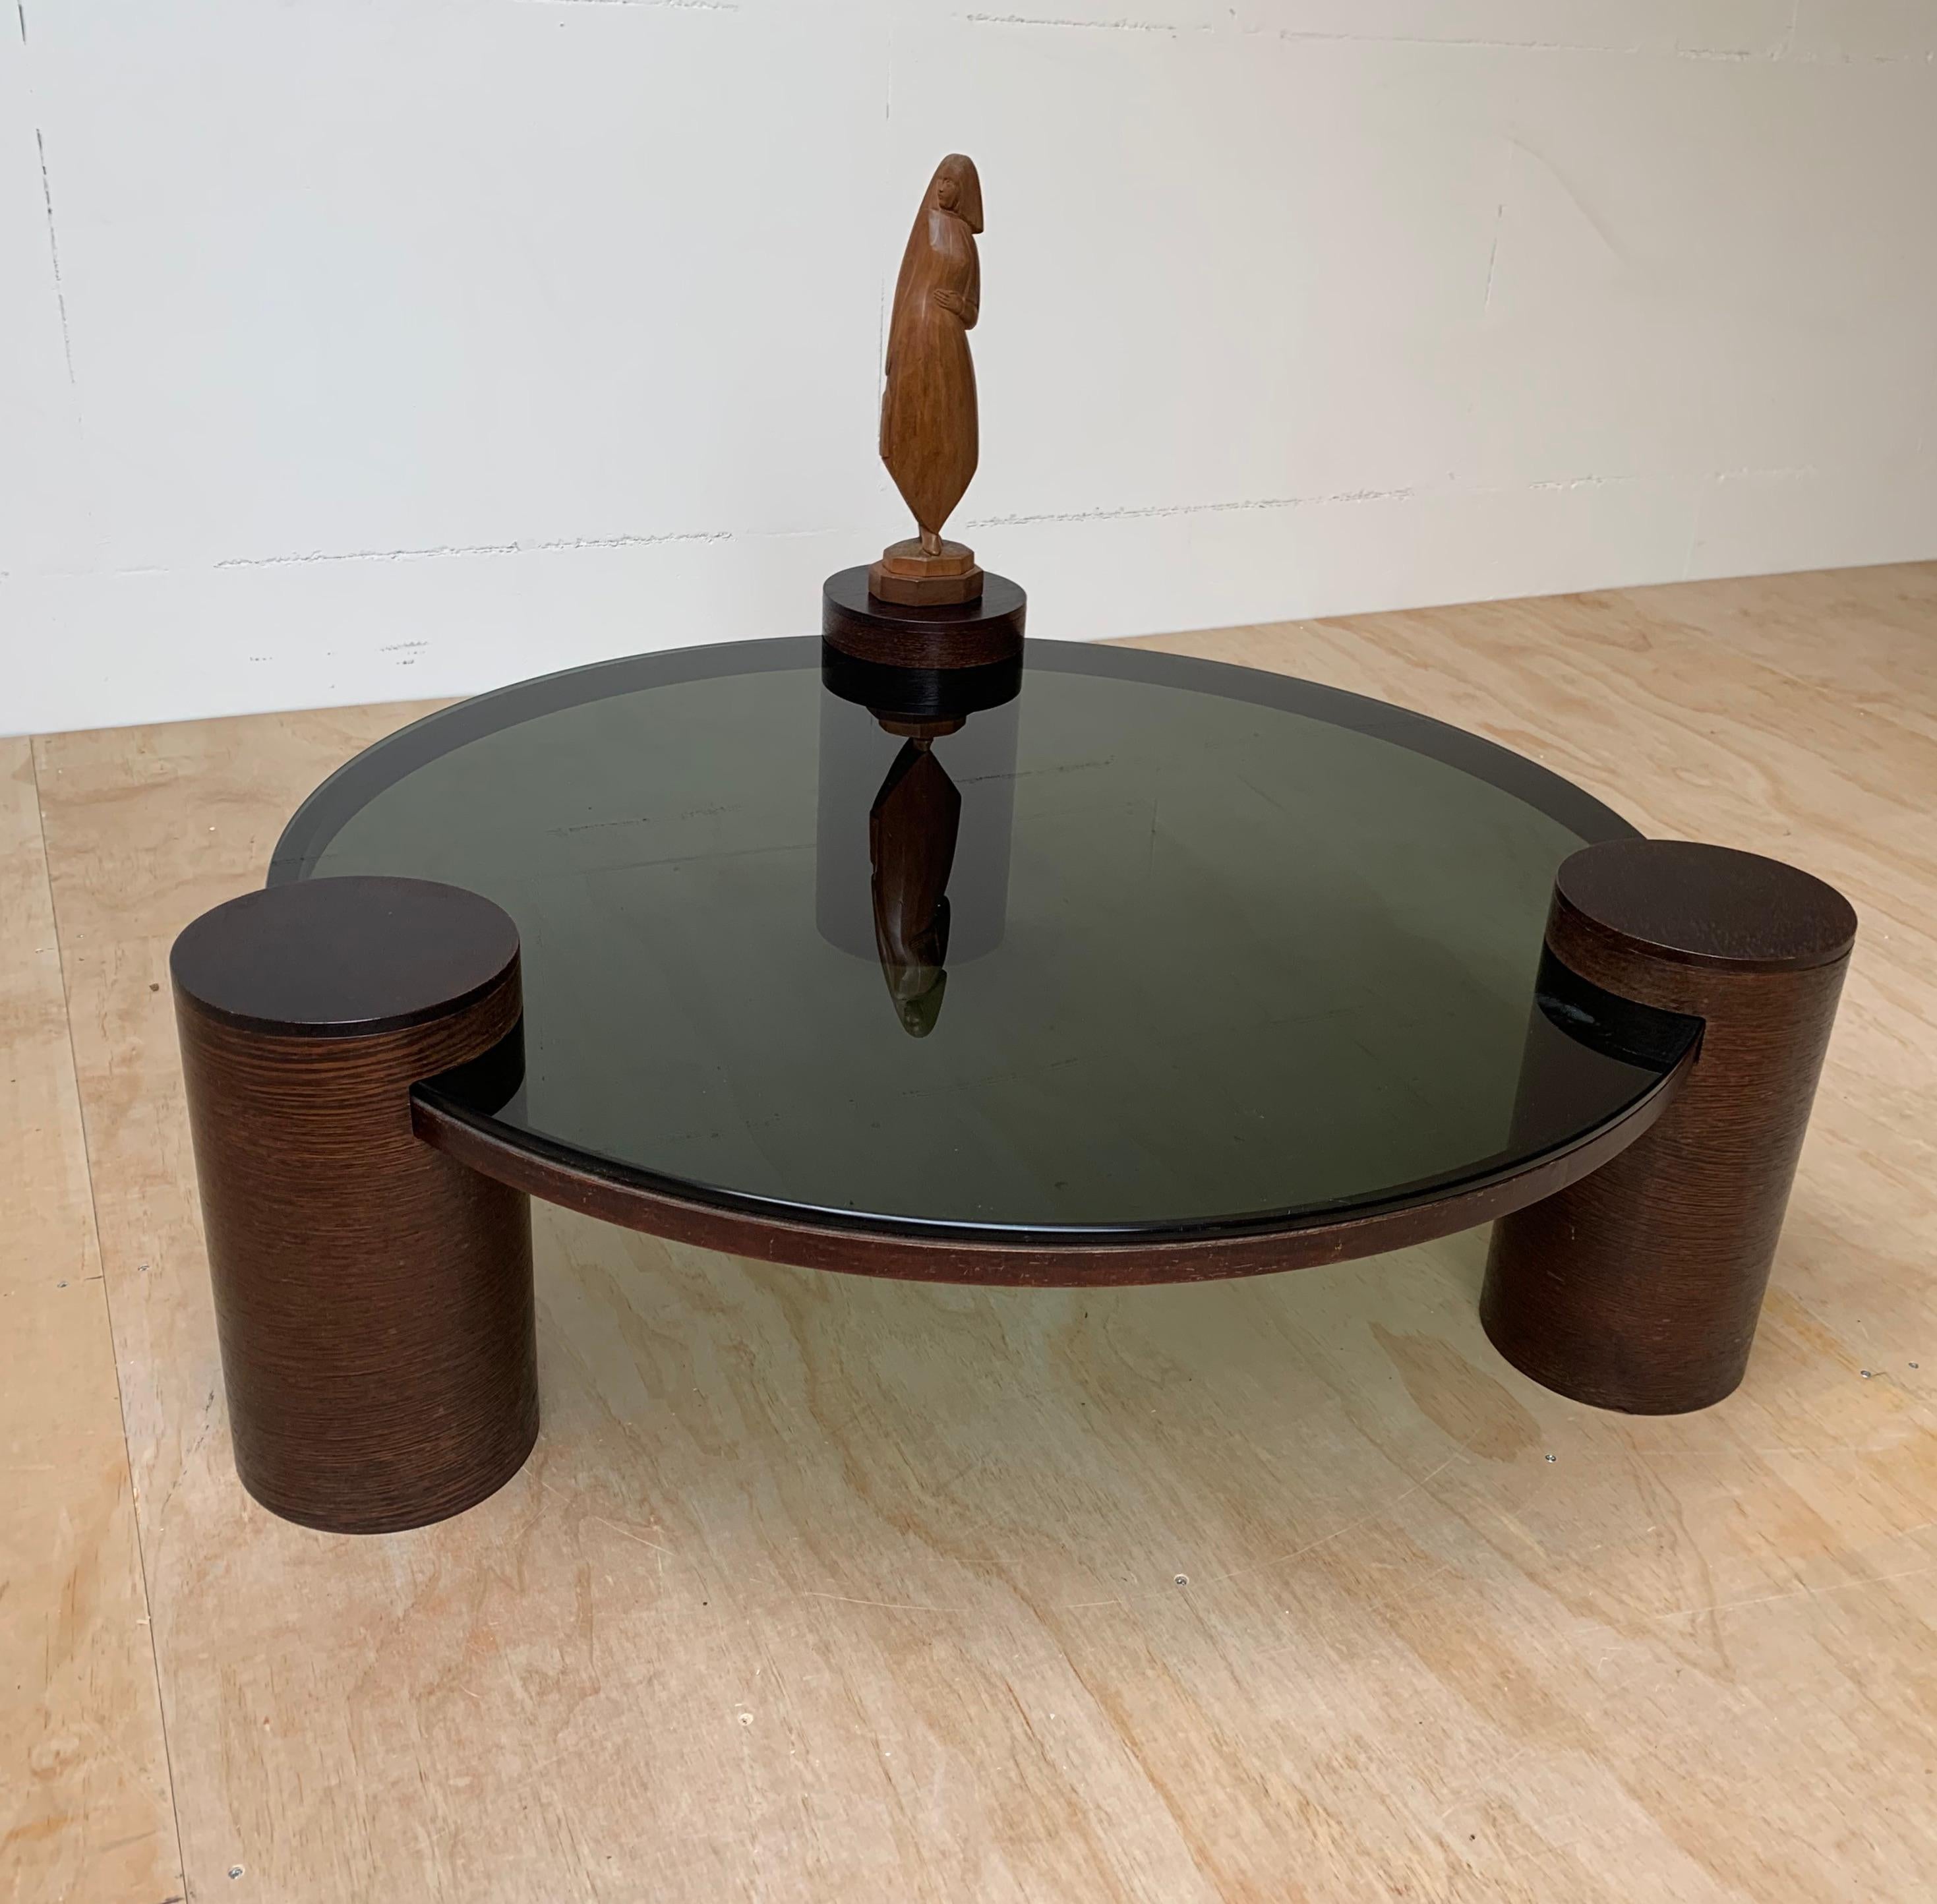 Unique Midcentury Modern Smoked Green Glass Coffee Table w Three Wooden Columns For Sale 4